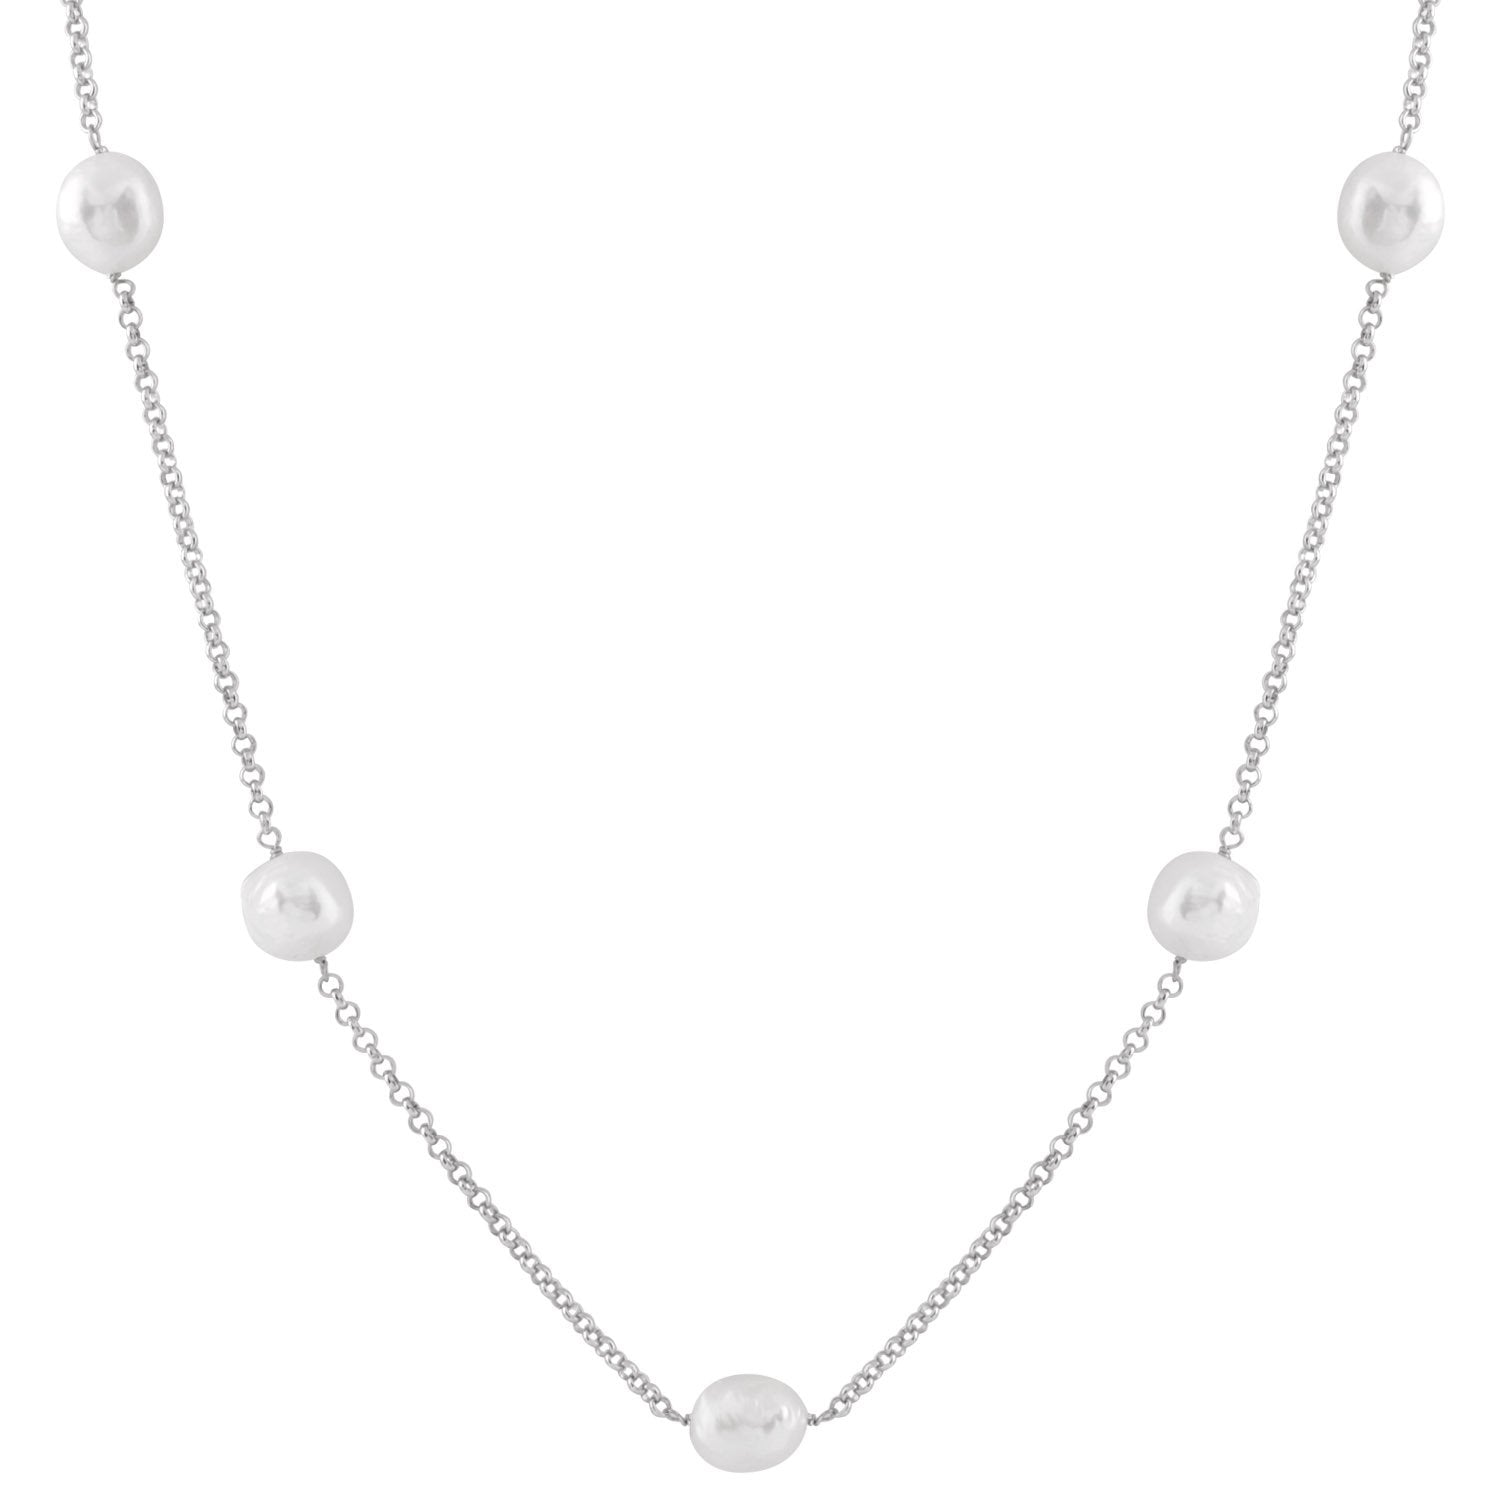 Beautiful Baroque Pearl Station Necklace